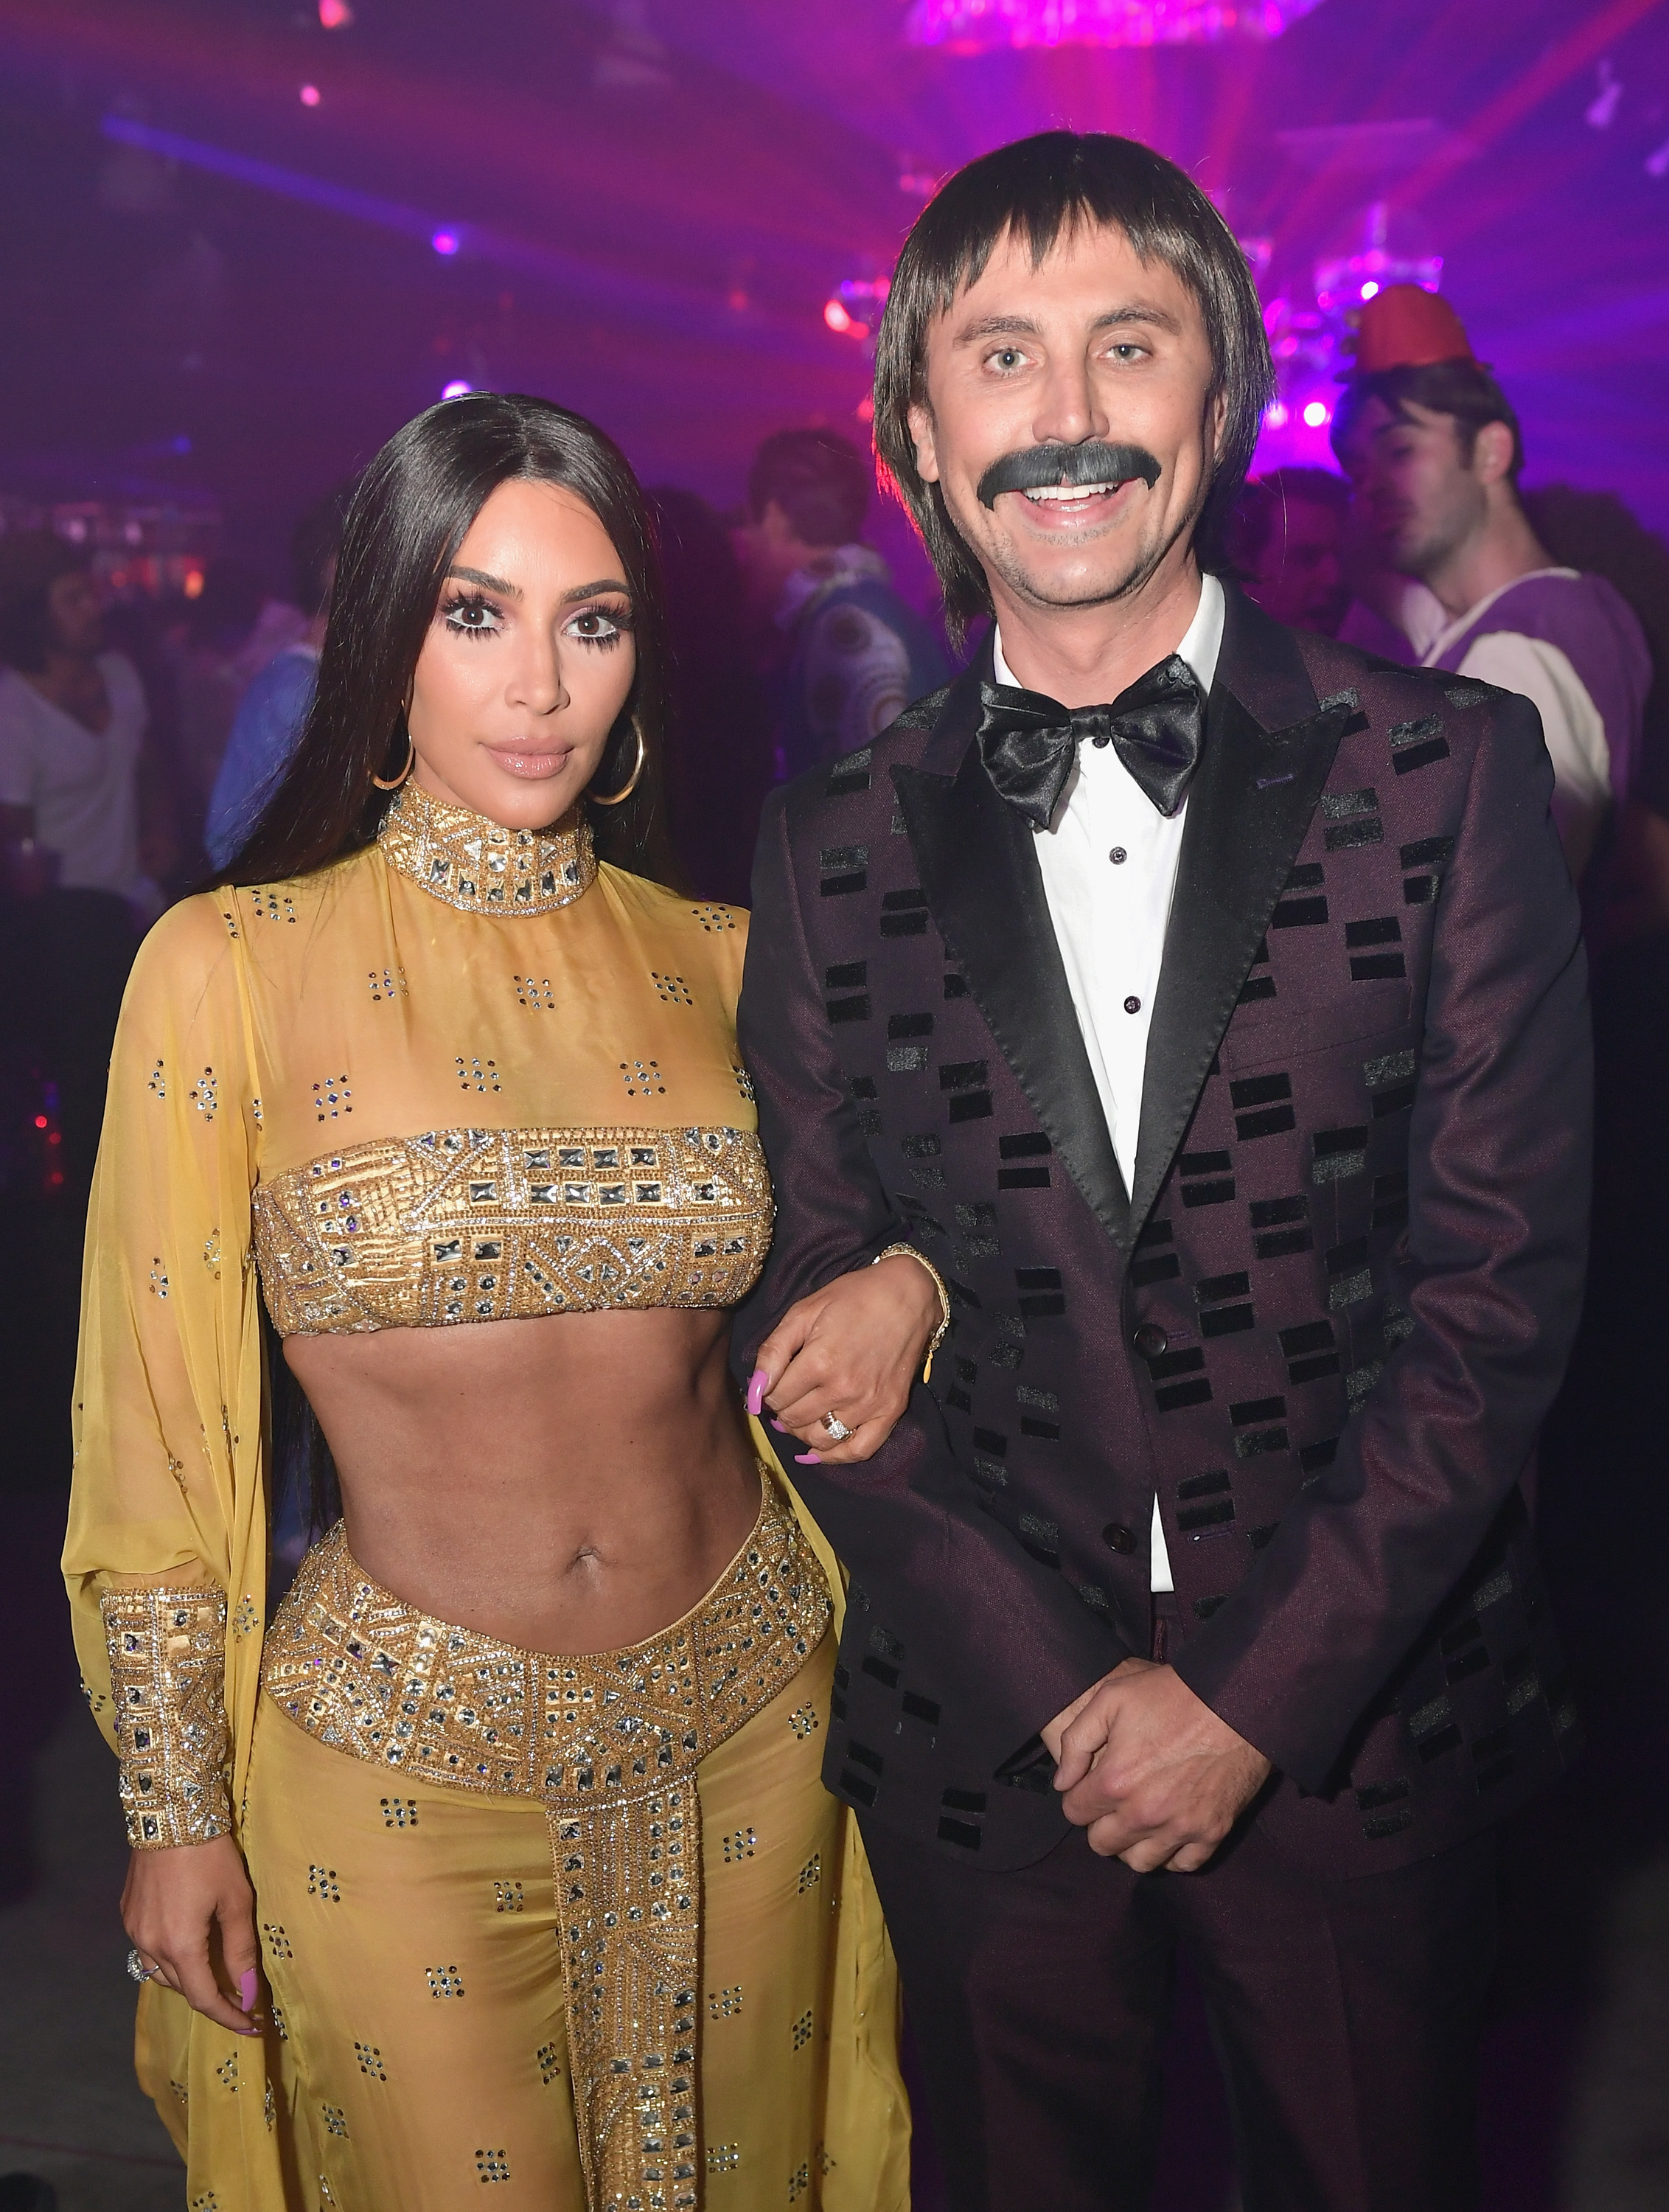 Kim Kardashian and Jonathan Cheban at the Casamigos Halloween party on October 27, 2017 in Los Angeles, California | Source: Getty Images